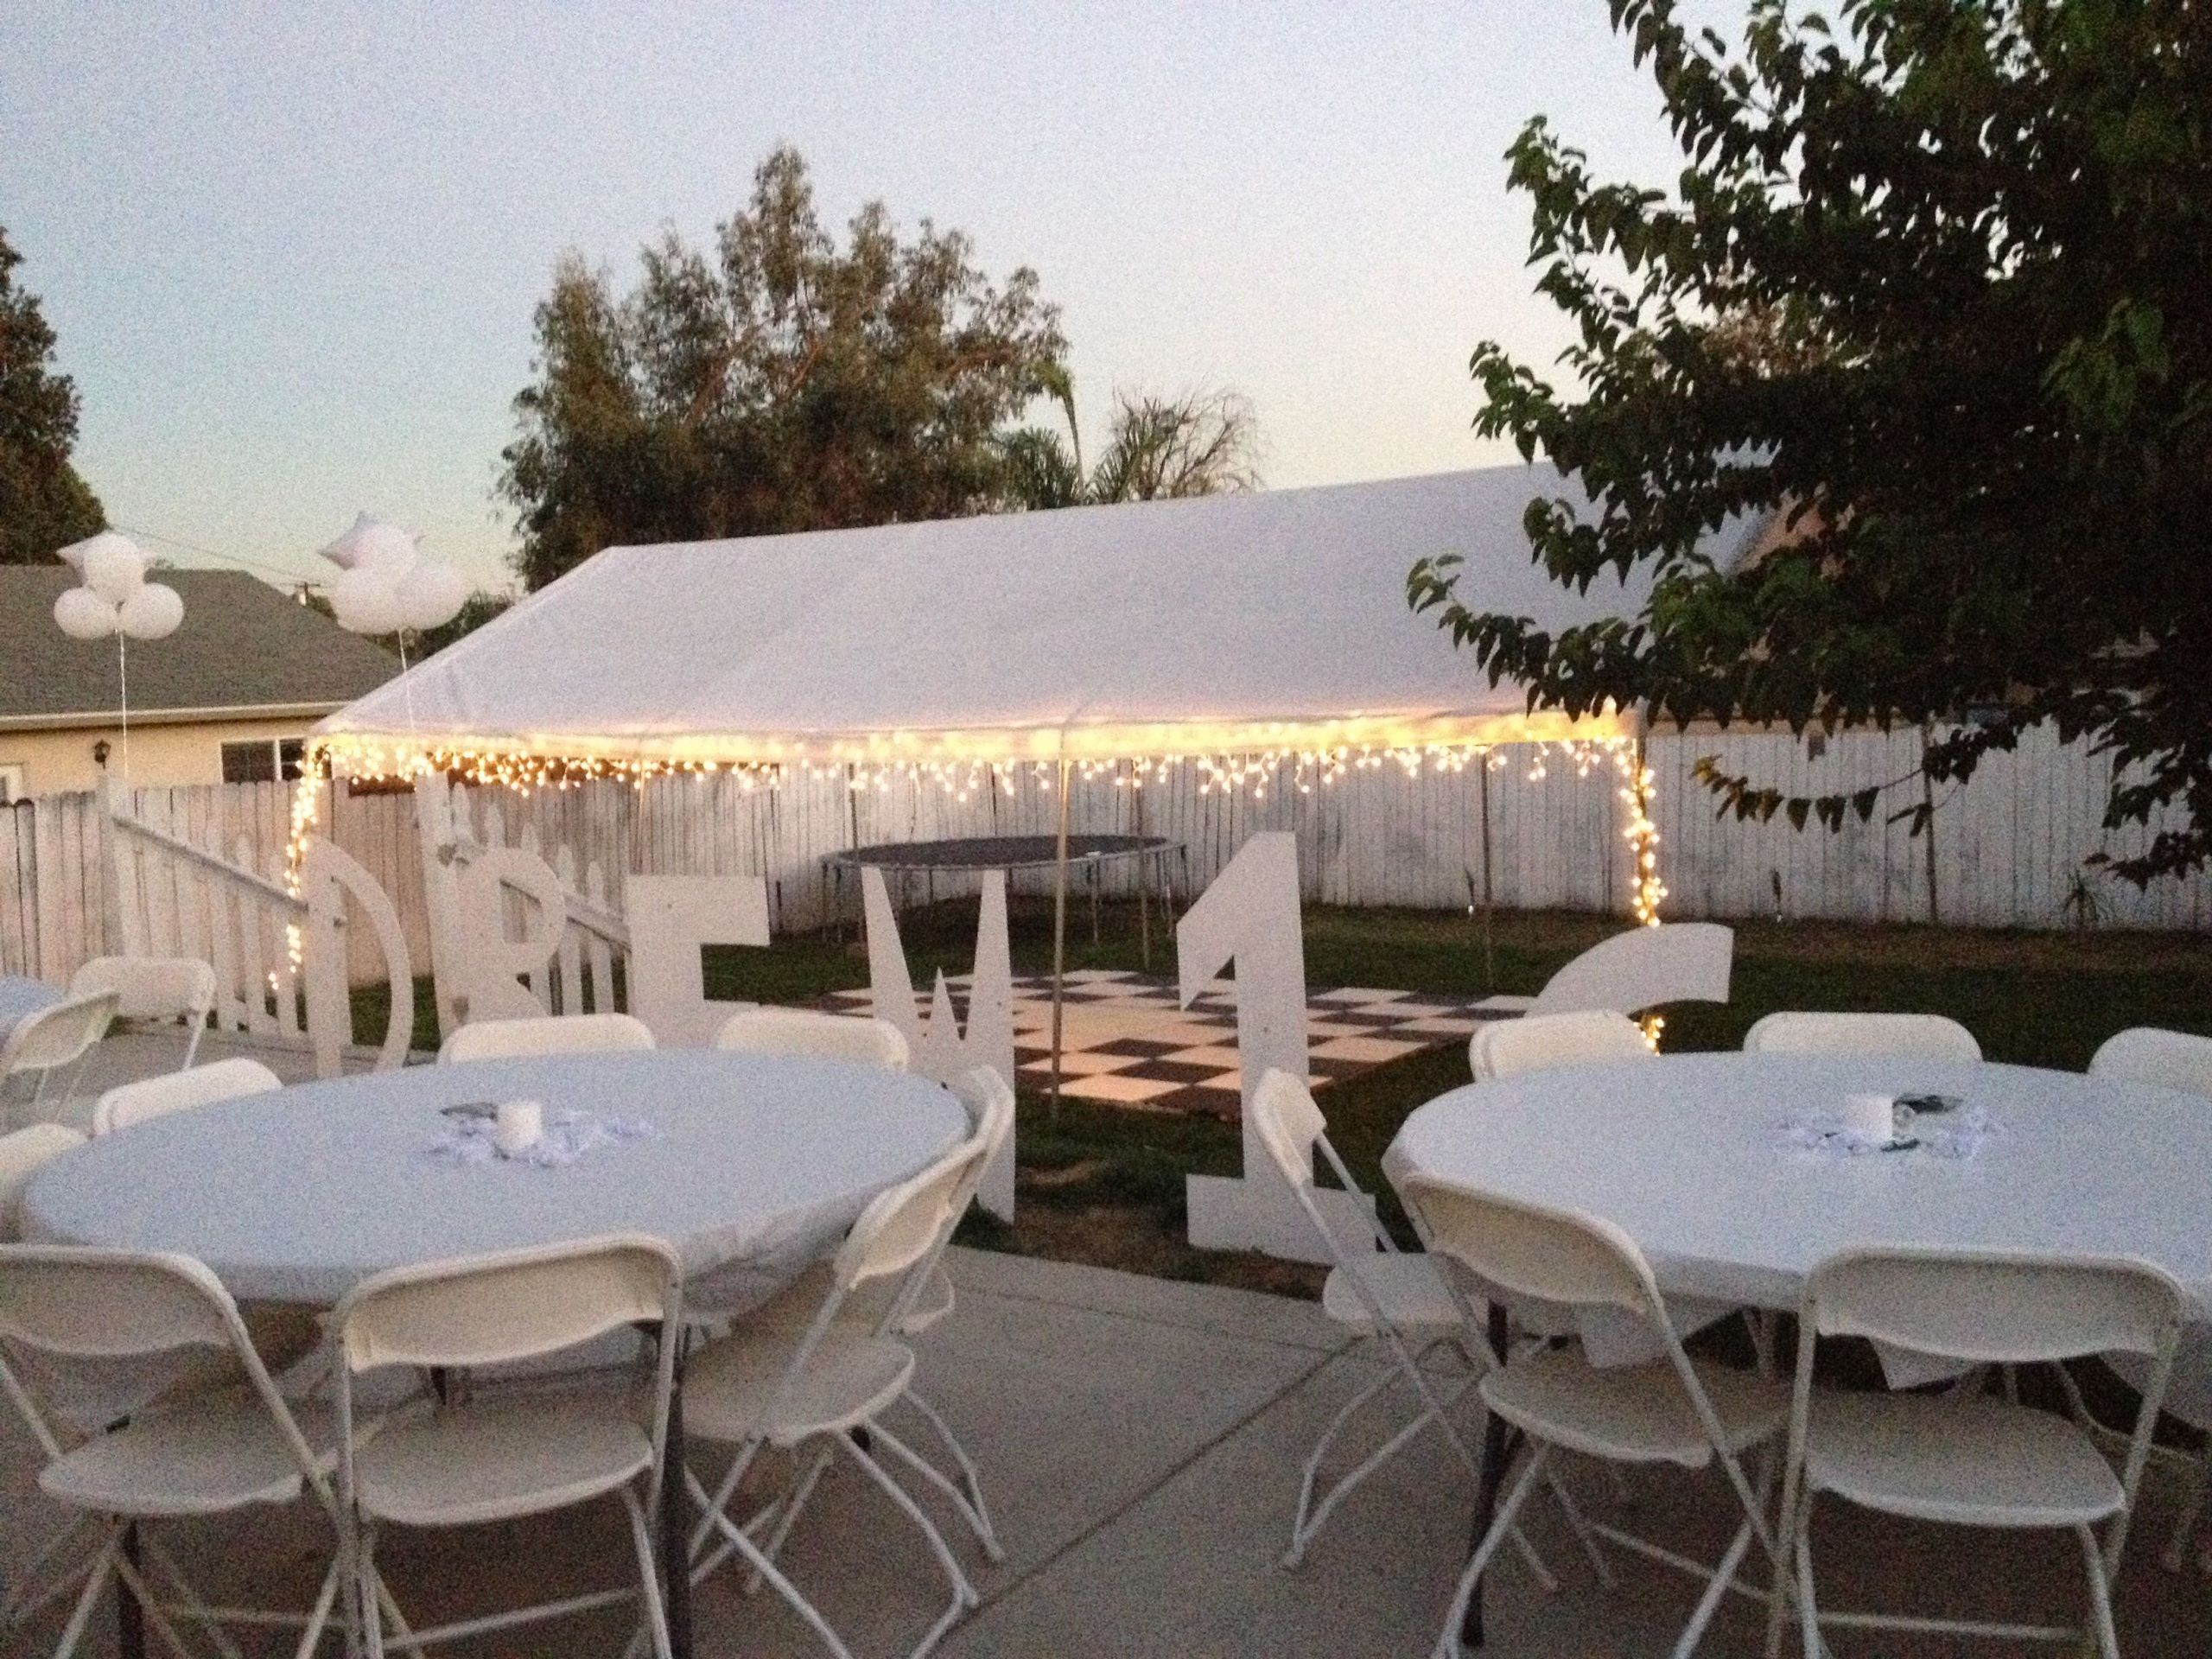 Backyard Party Set Up Ideas
 All white party backyard set up in 2019